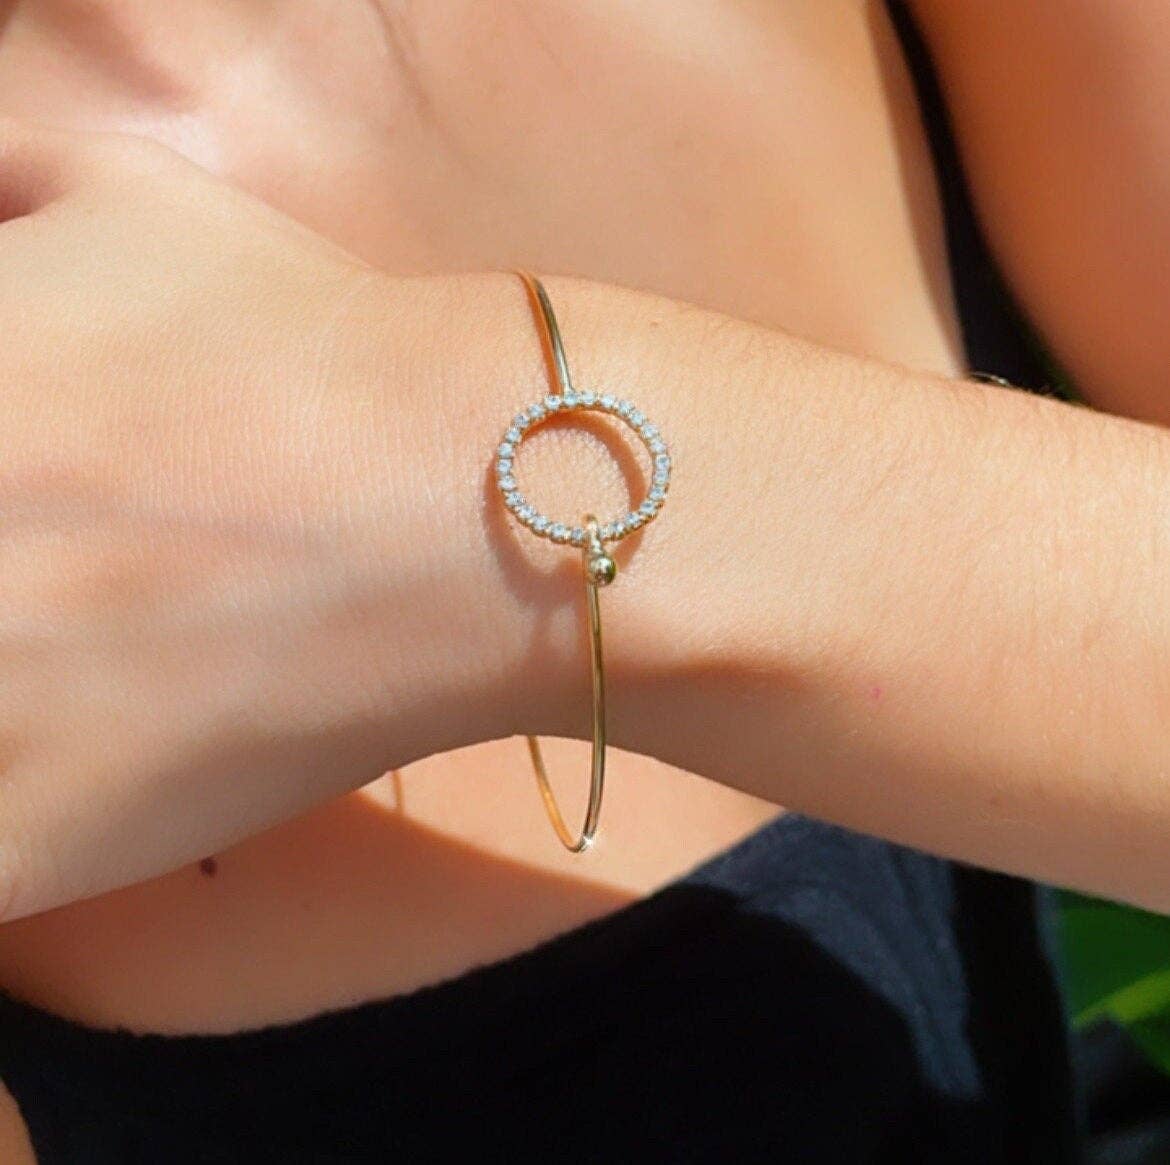 18k Gold Filled Dainty Cubic Zirconia Circle Or Star Bangle